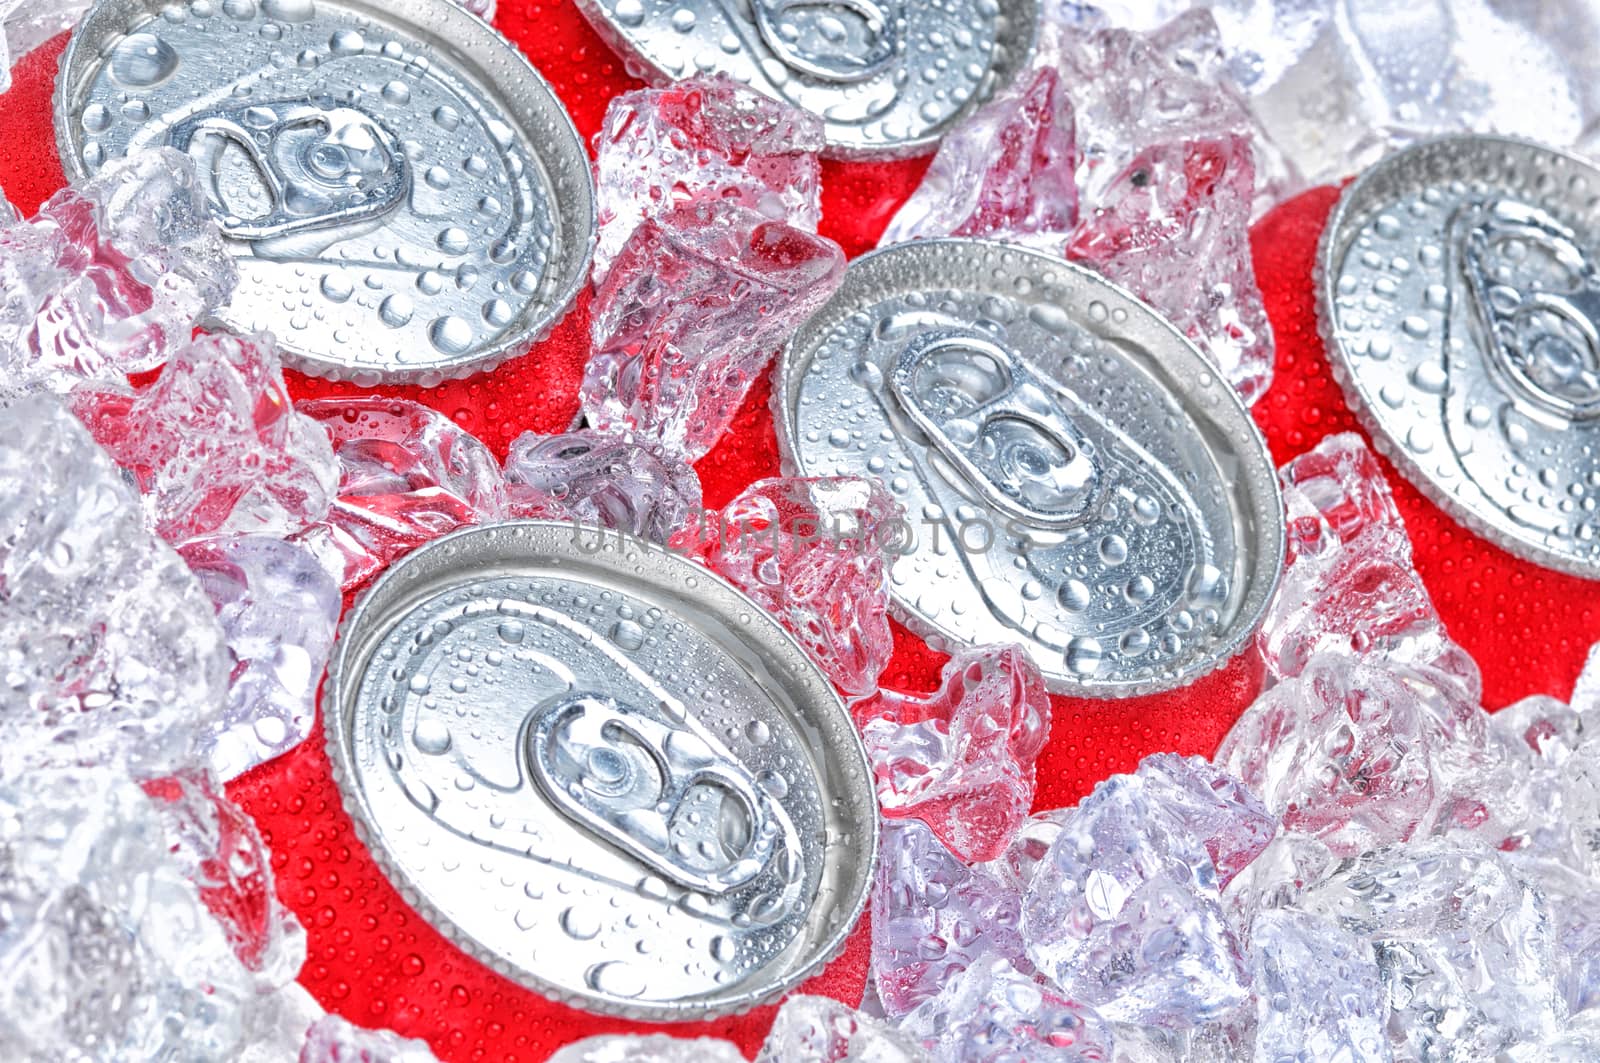 Closeup of a group of soda cans in ice with condensation.